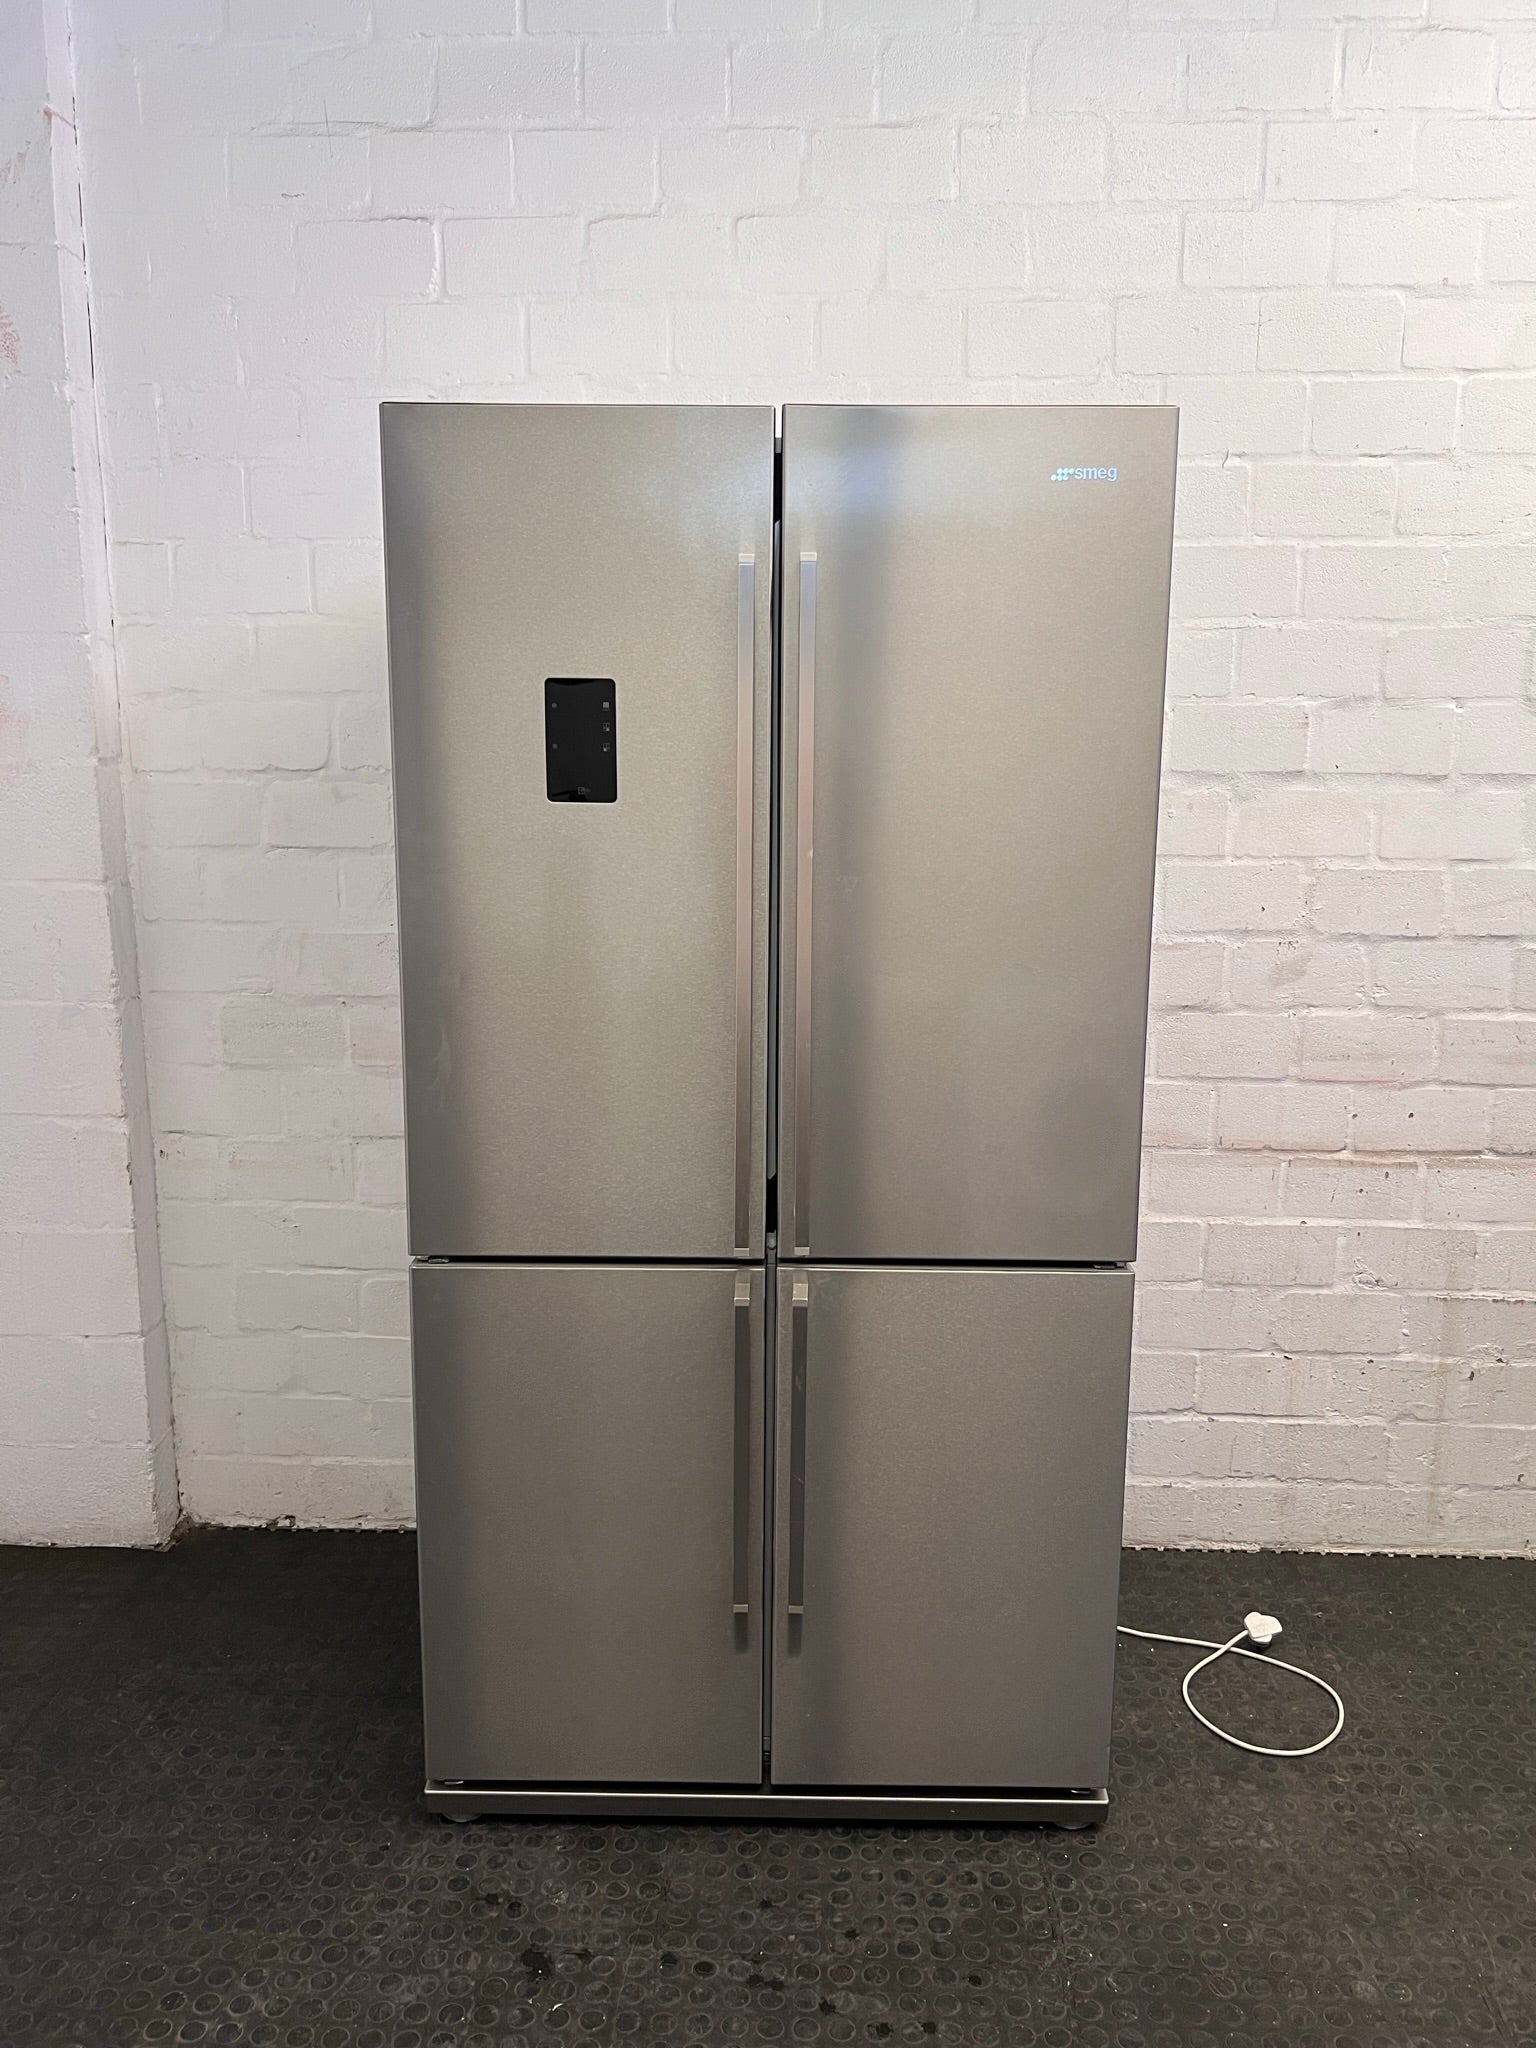 Silver Smeg Double Door Fridge Freezer (Note: Bottom Right Compartment Cools But Not To Freezing & Rattles) - REDUCED